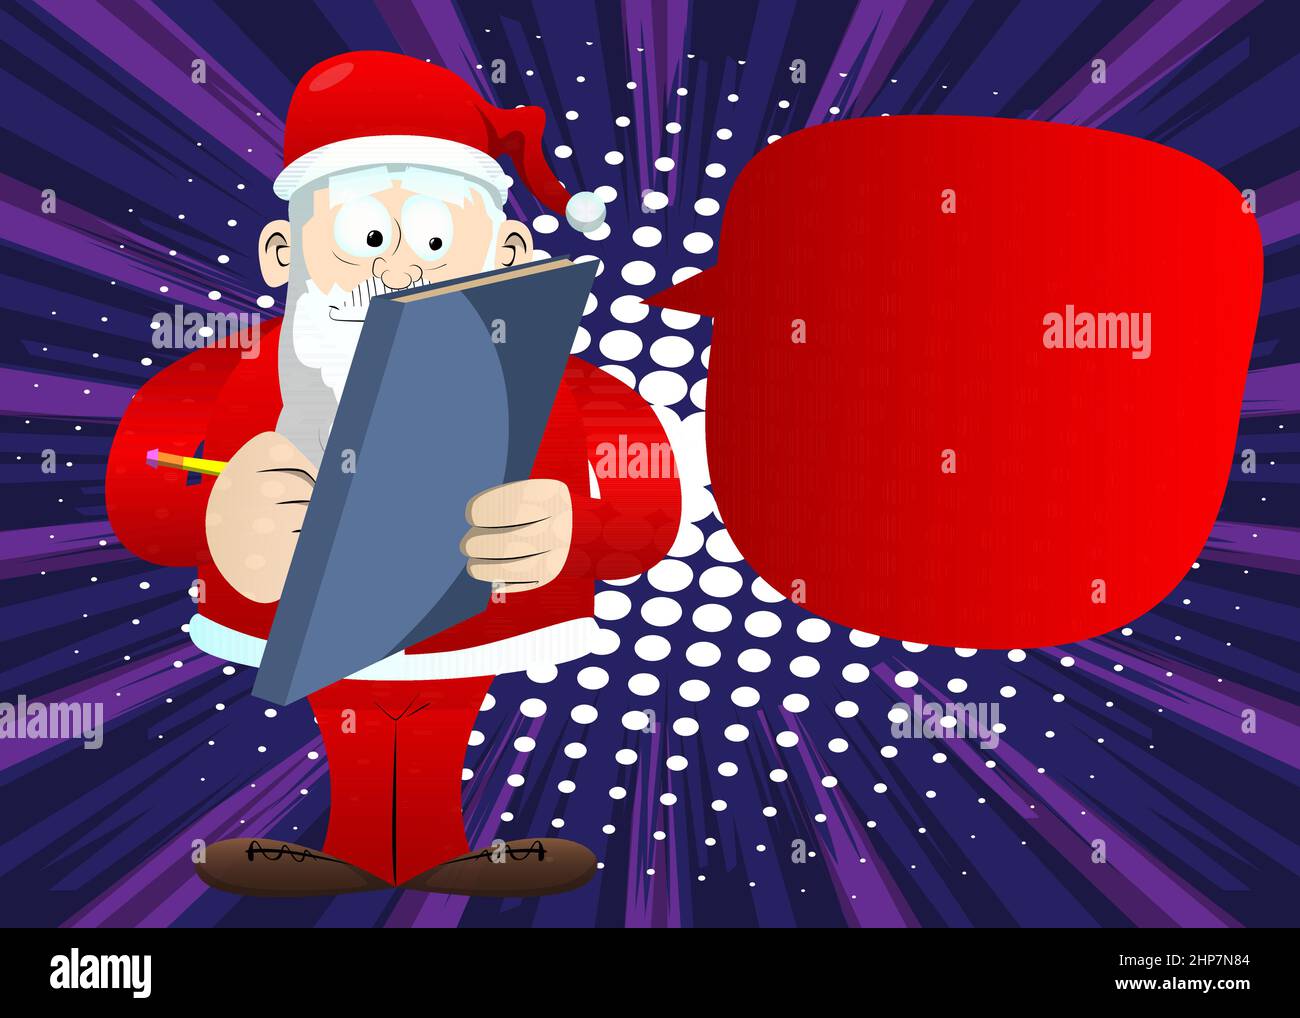 Santa Claus in his red clothes with white beard writing on a books cover. Stock Vector